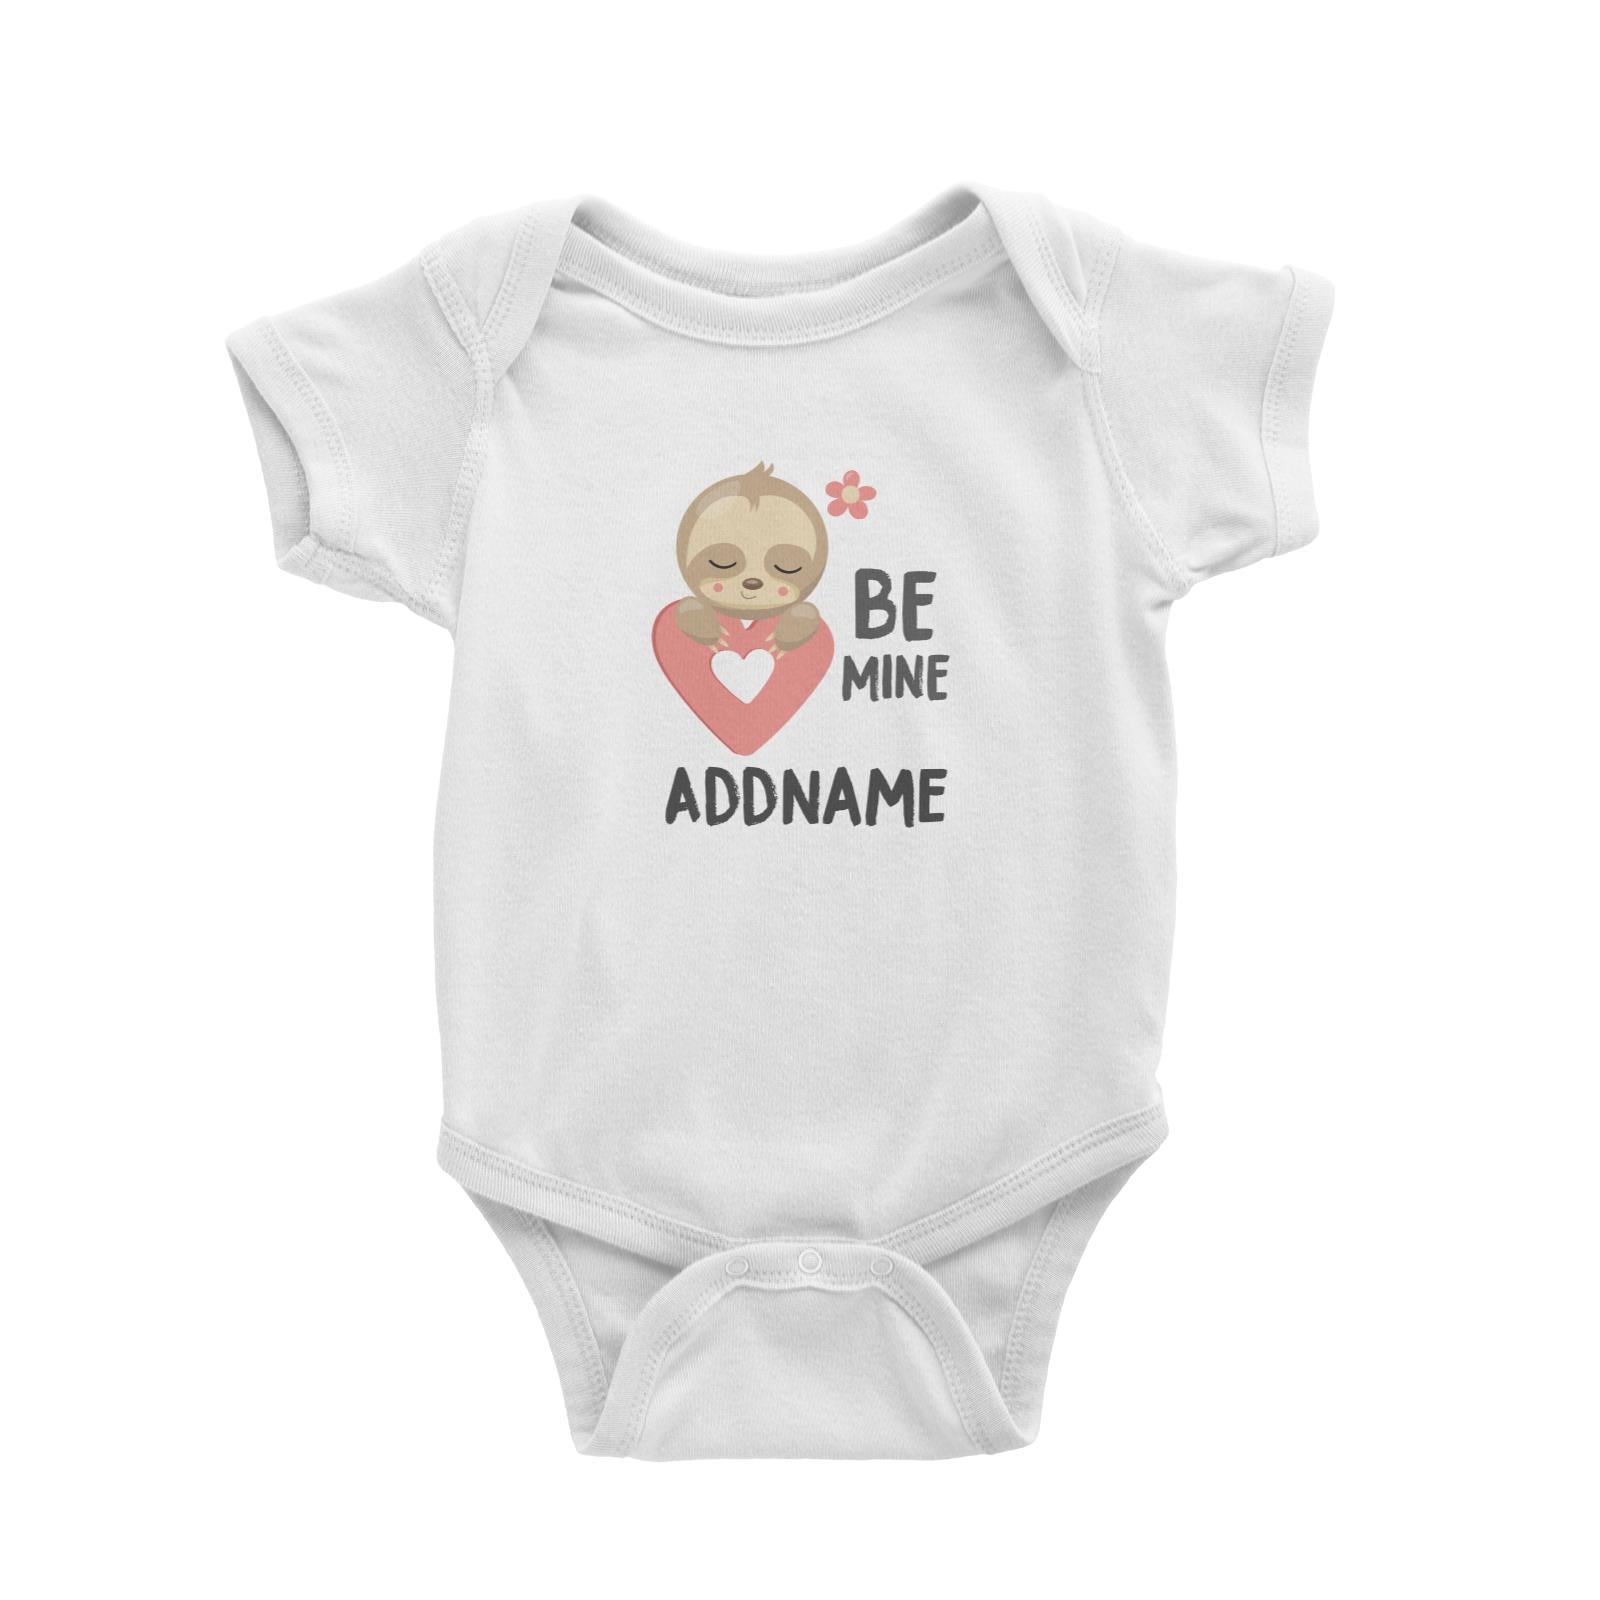 Cute Sloth Be Mine with Heart Addname White Baby Romper